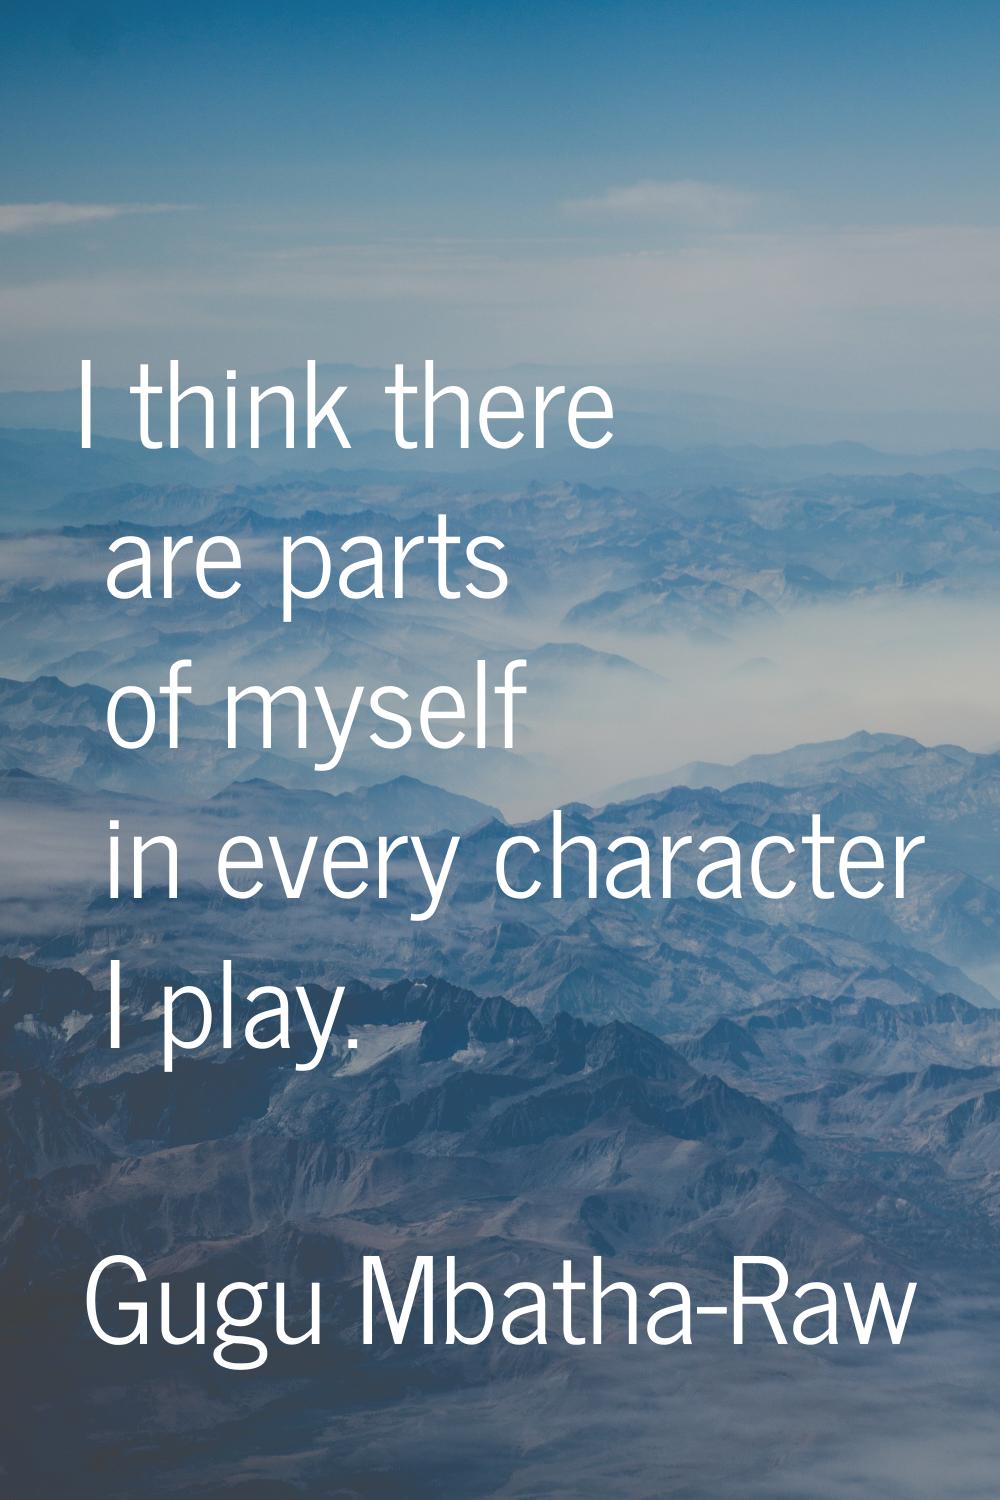 I think there are parts of myself in every character I play.